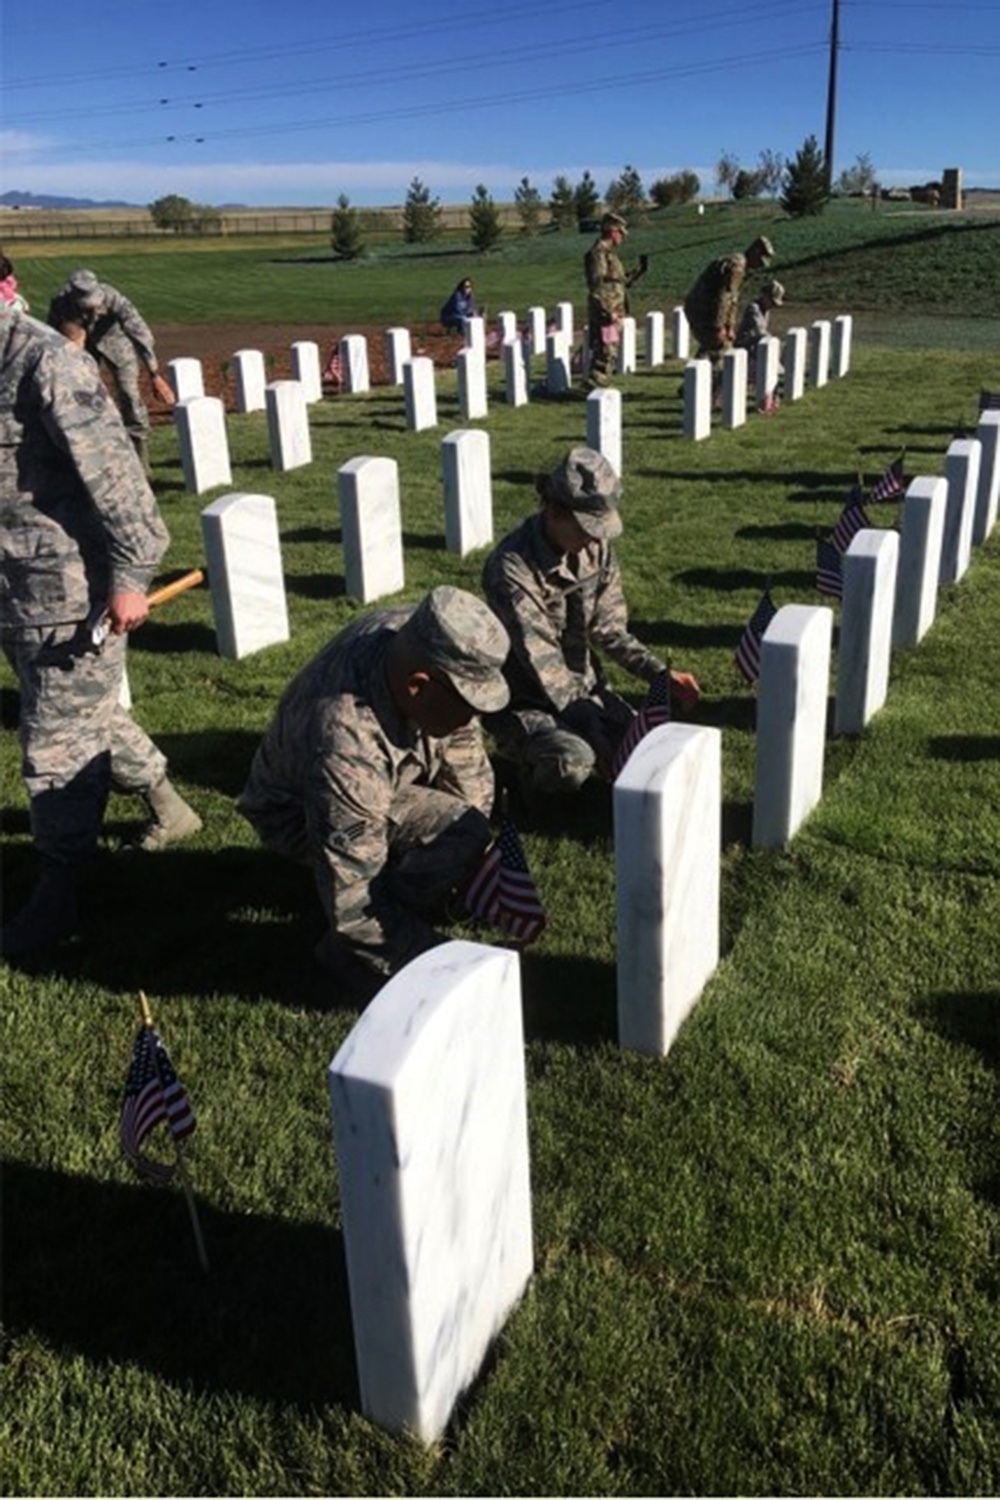 DVIDS Images Placing Flags Across America [Image 1 of 2]